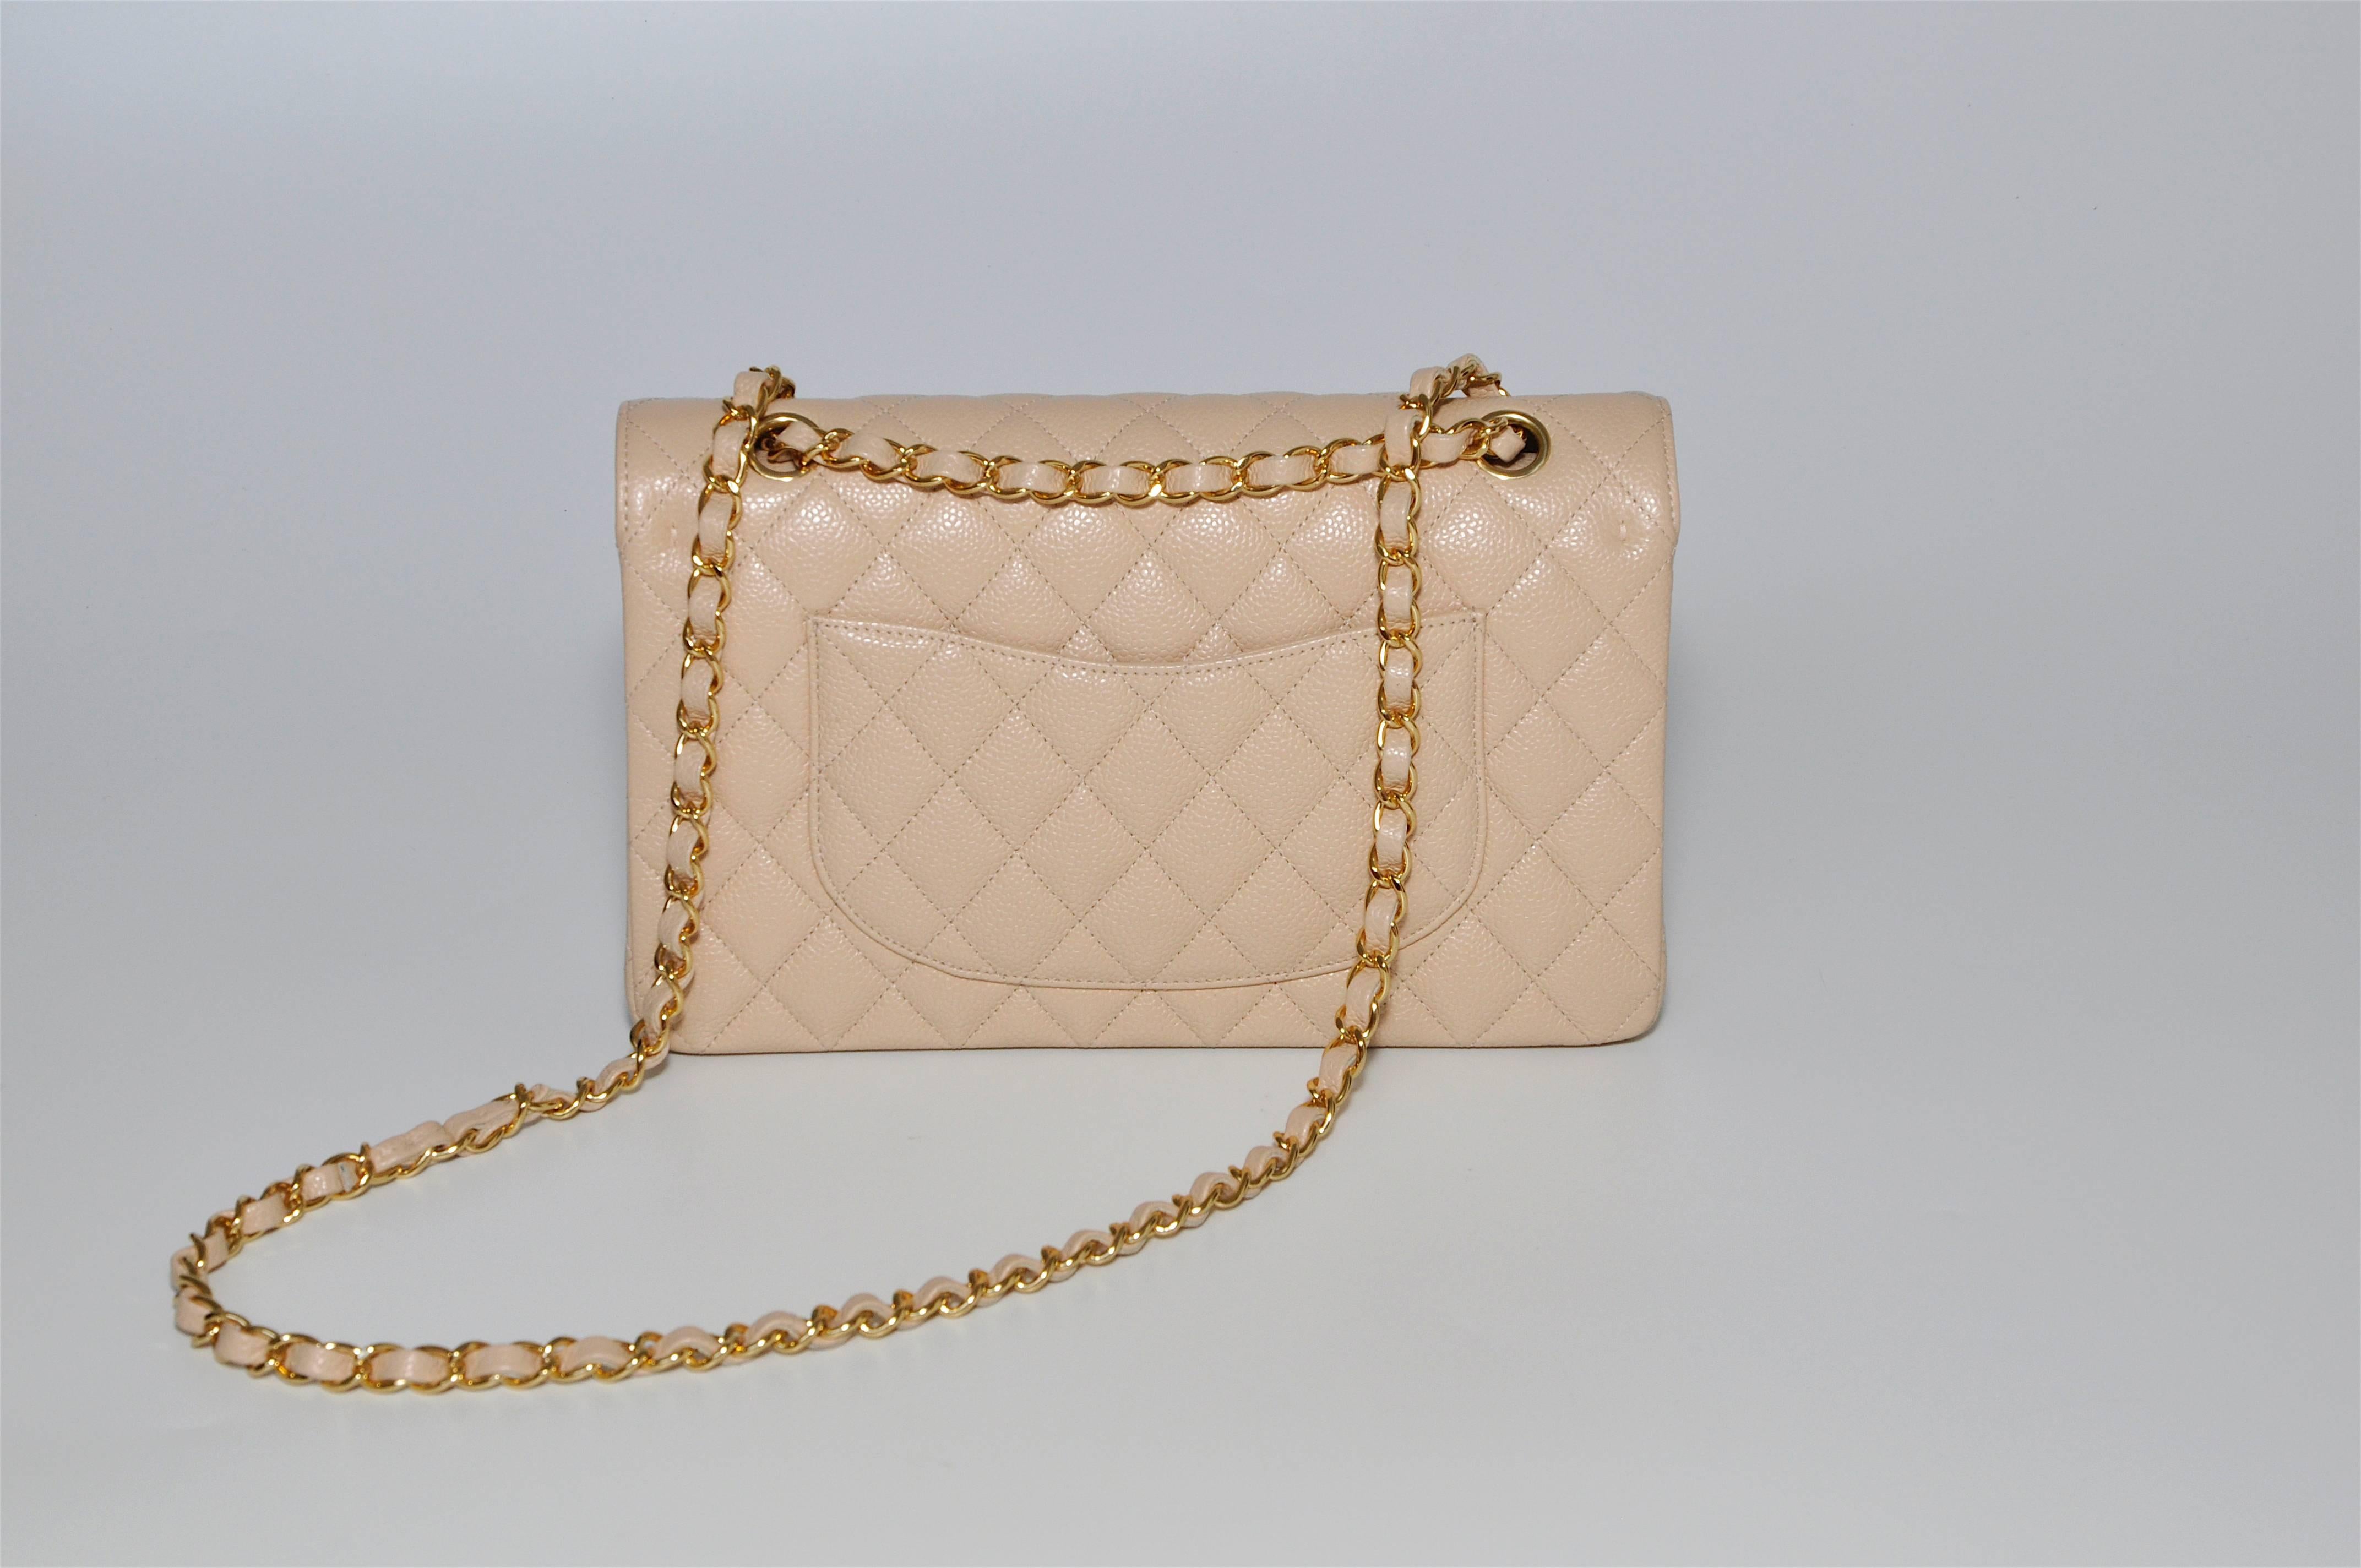 Classic Chanel bag in a beautiful beige creamy coloured quilted calfskin leather in caviar (subtle textured grainy finish) with gold metal hardware. This is an iconic design that has been synonymous with the fashion house for years, as of 2016 it is